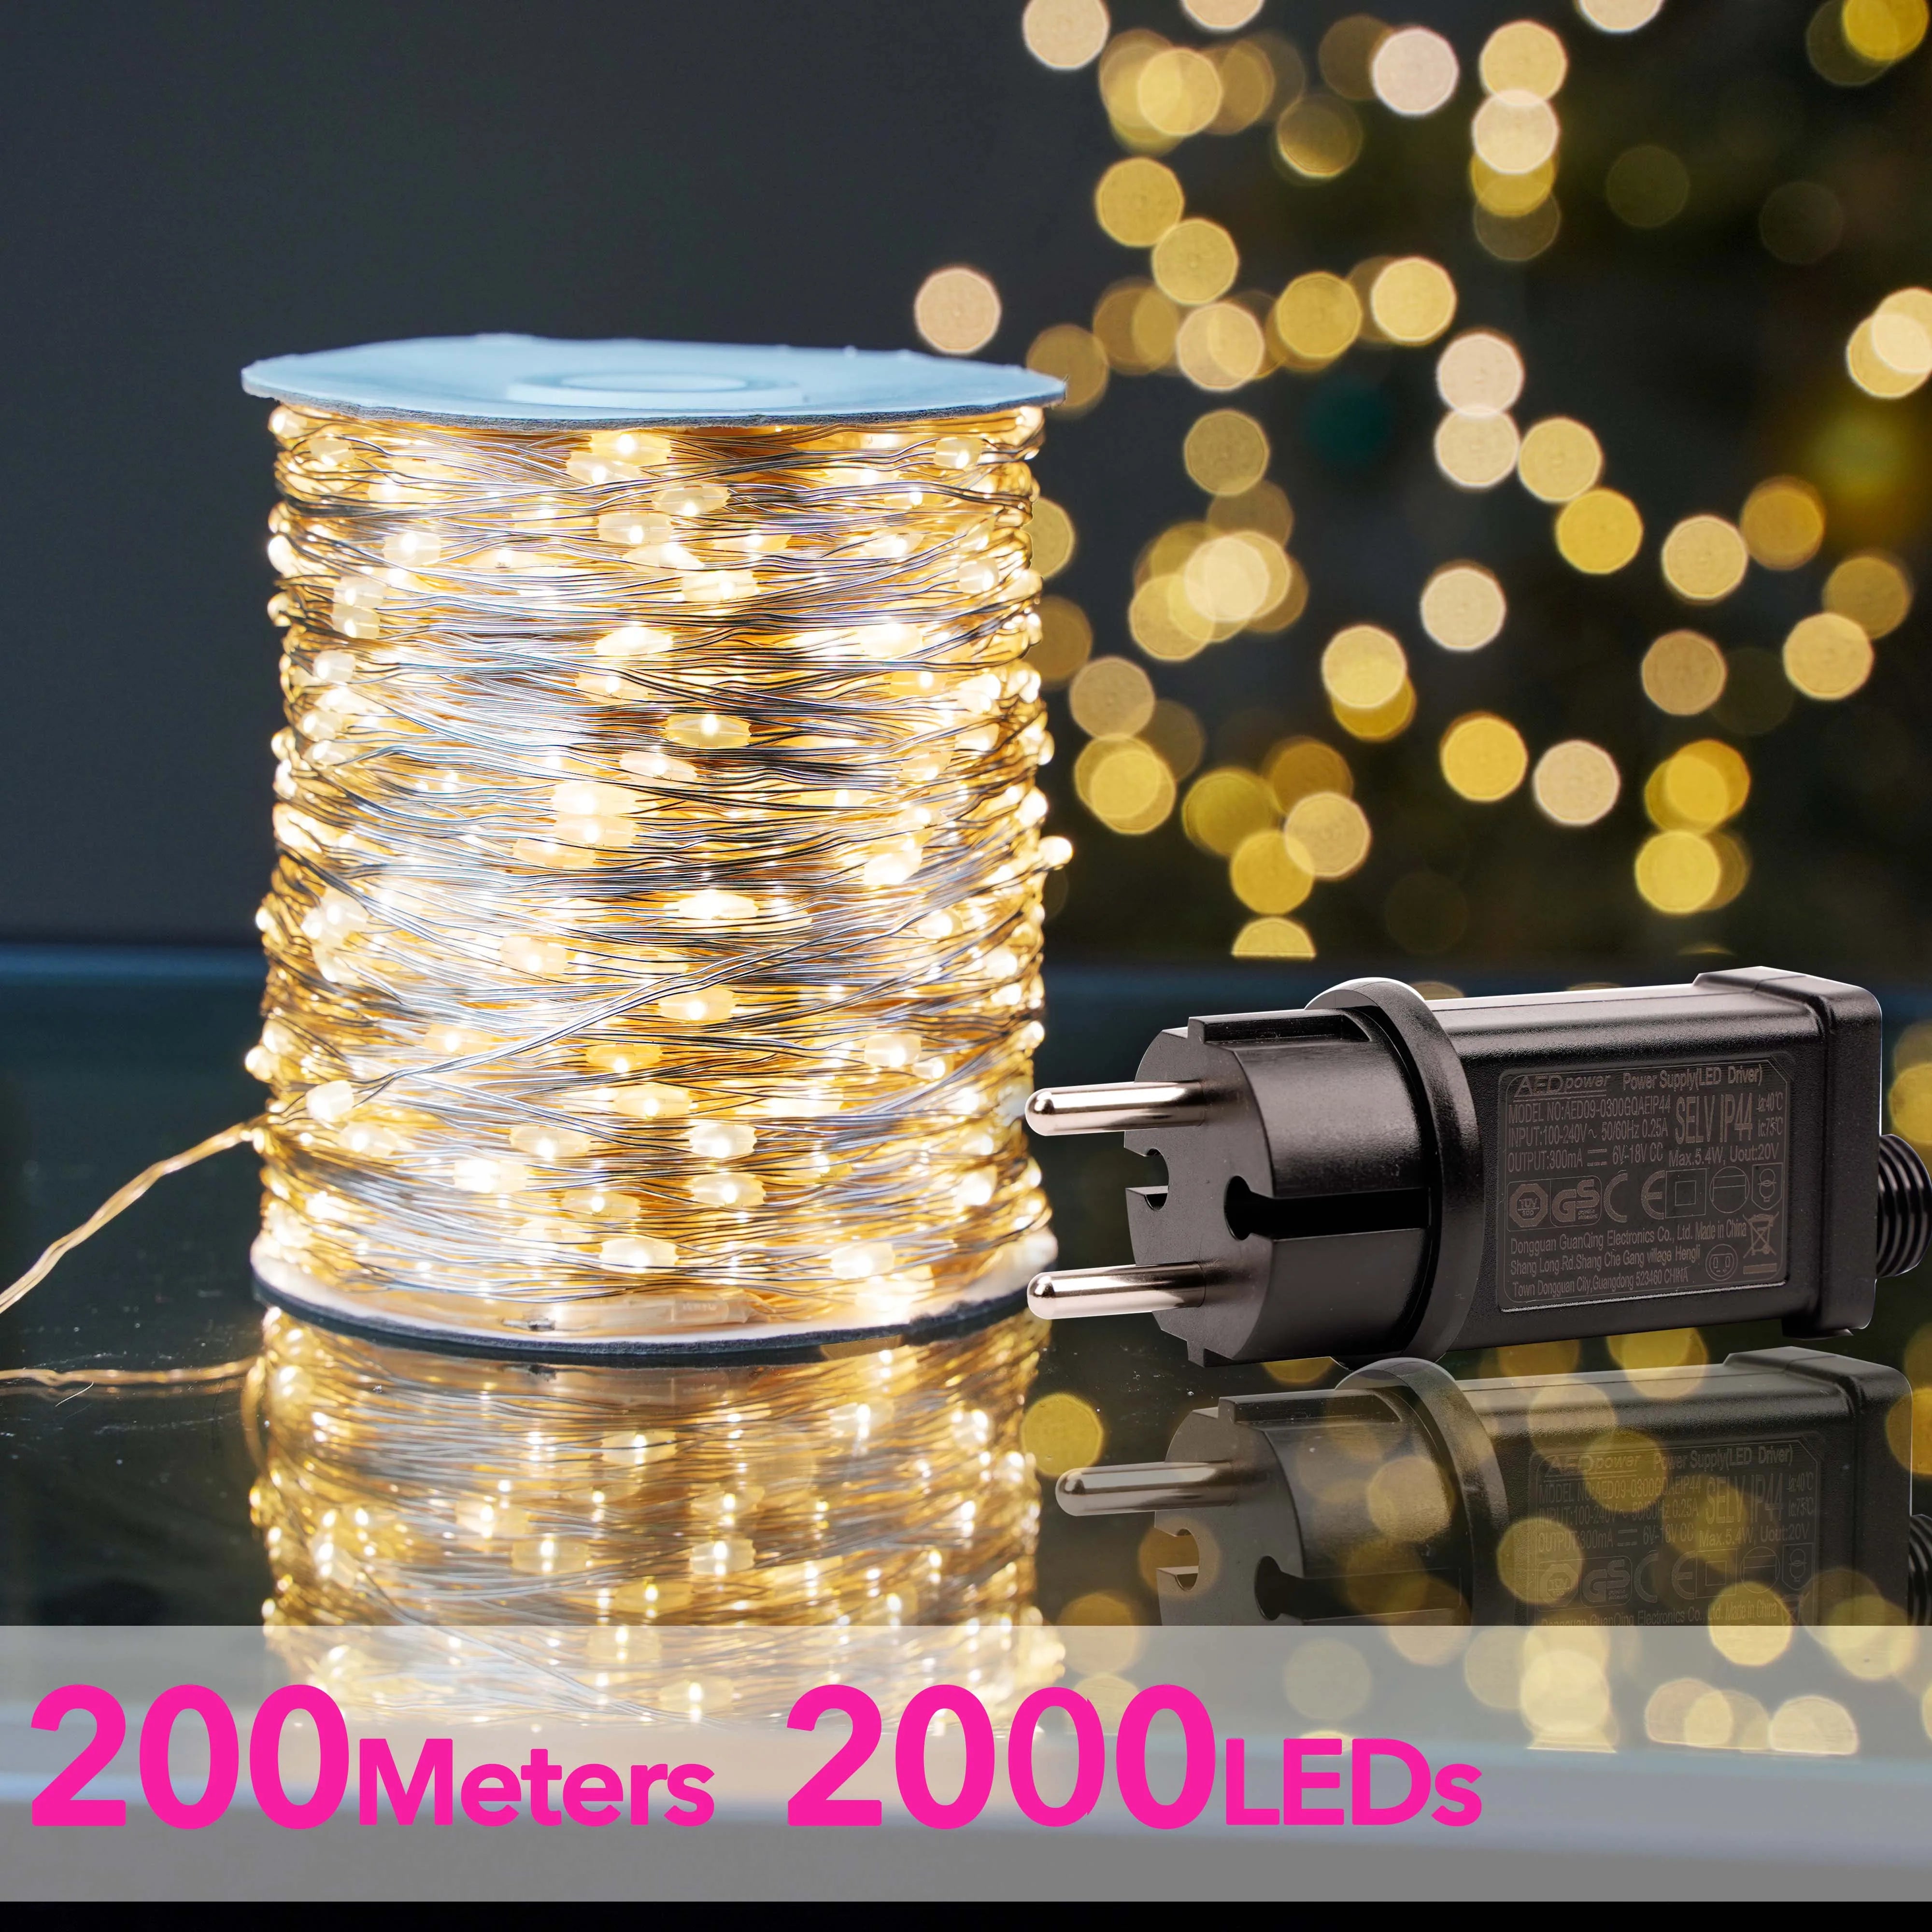 30m 50m 100m 200m LED String Lights Street Fairy Light Waterproof for Outdoor Christmas Fairy Lights Holiday Wedding Decoration